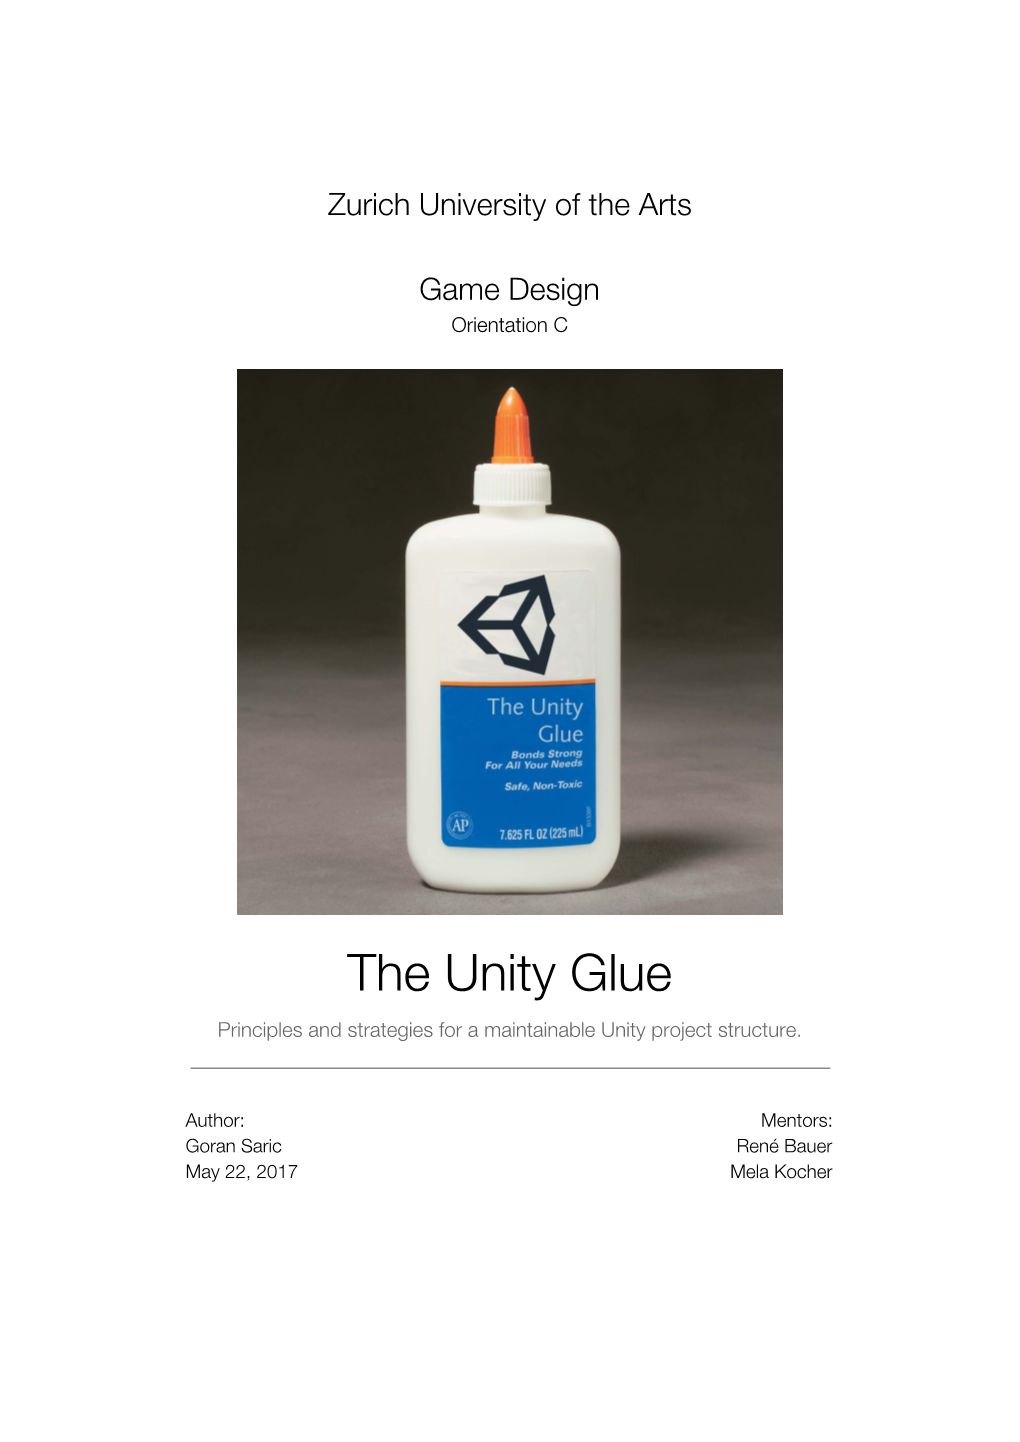 The Unity Glue Principles and Strategies for a Maintainable Unity Project Structure